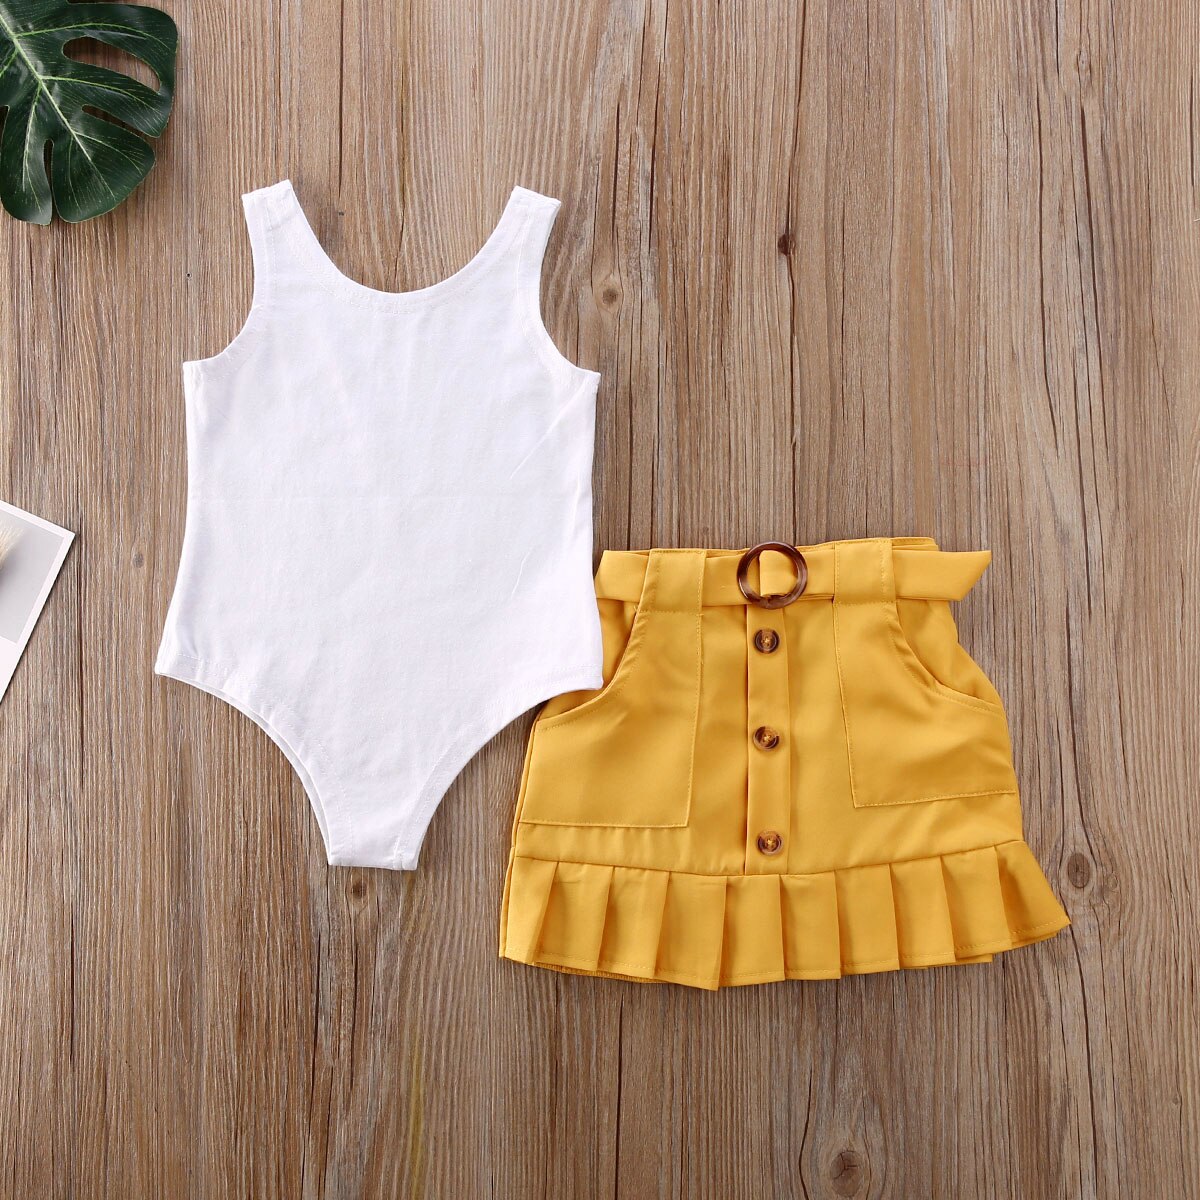 0-5Y-Fashion-Toddler-Kids-Baby-Girls-Clothes-Sets-Solid-Sleeveless-Bodysuit-Tops-Yellow-Pleated-Skirts-1